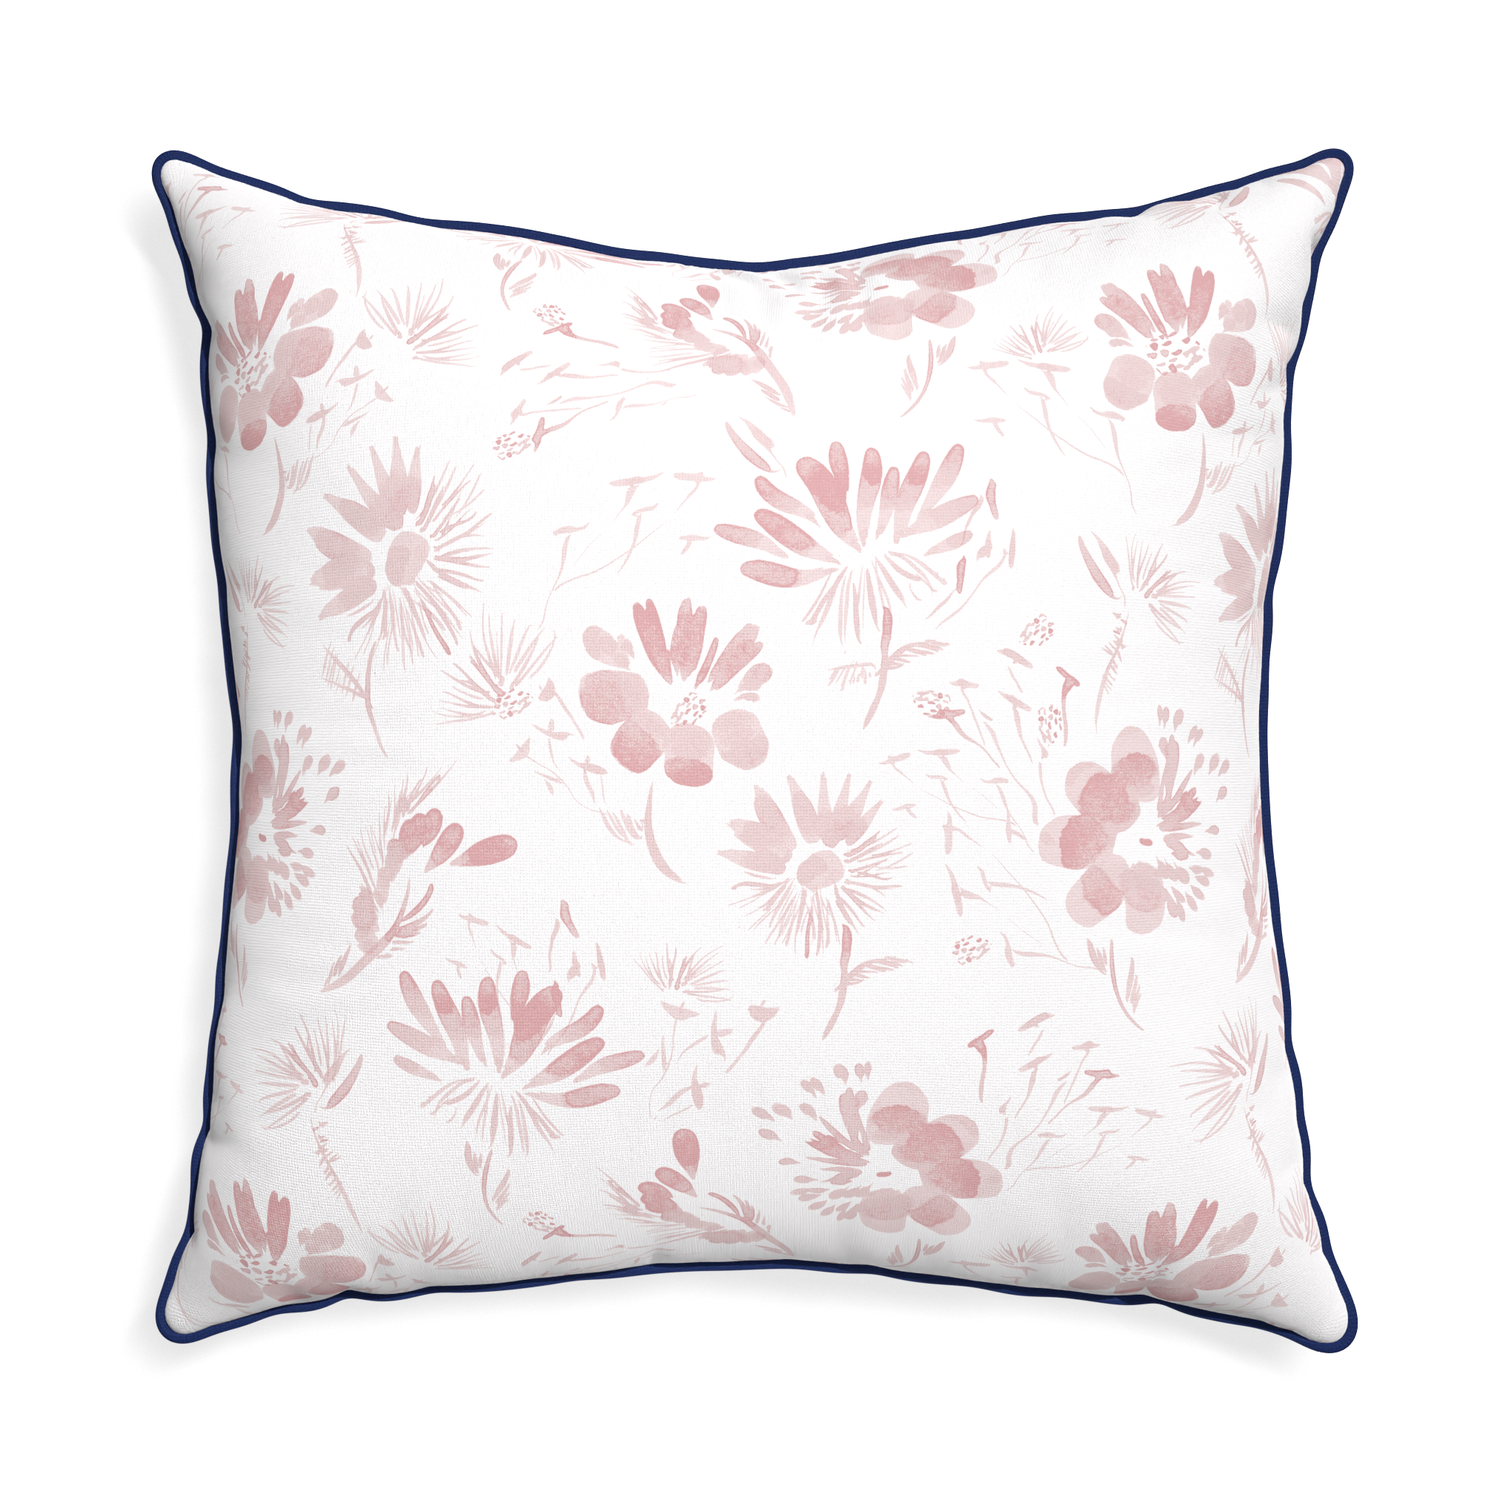 Euro-sham blake custom pink floralpillow with midnight piping on white background